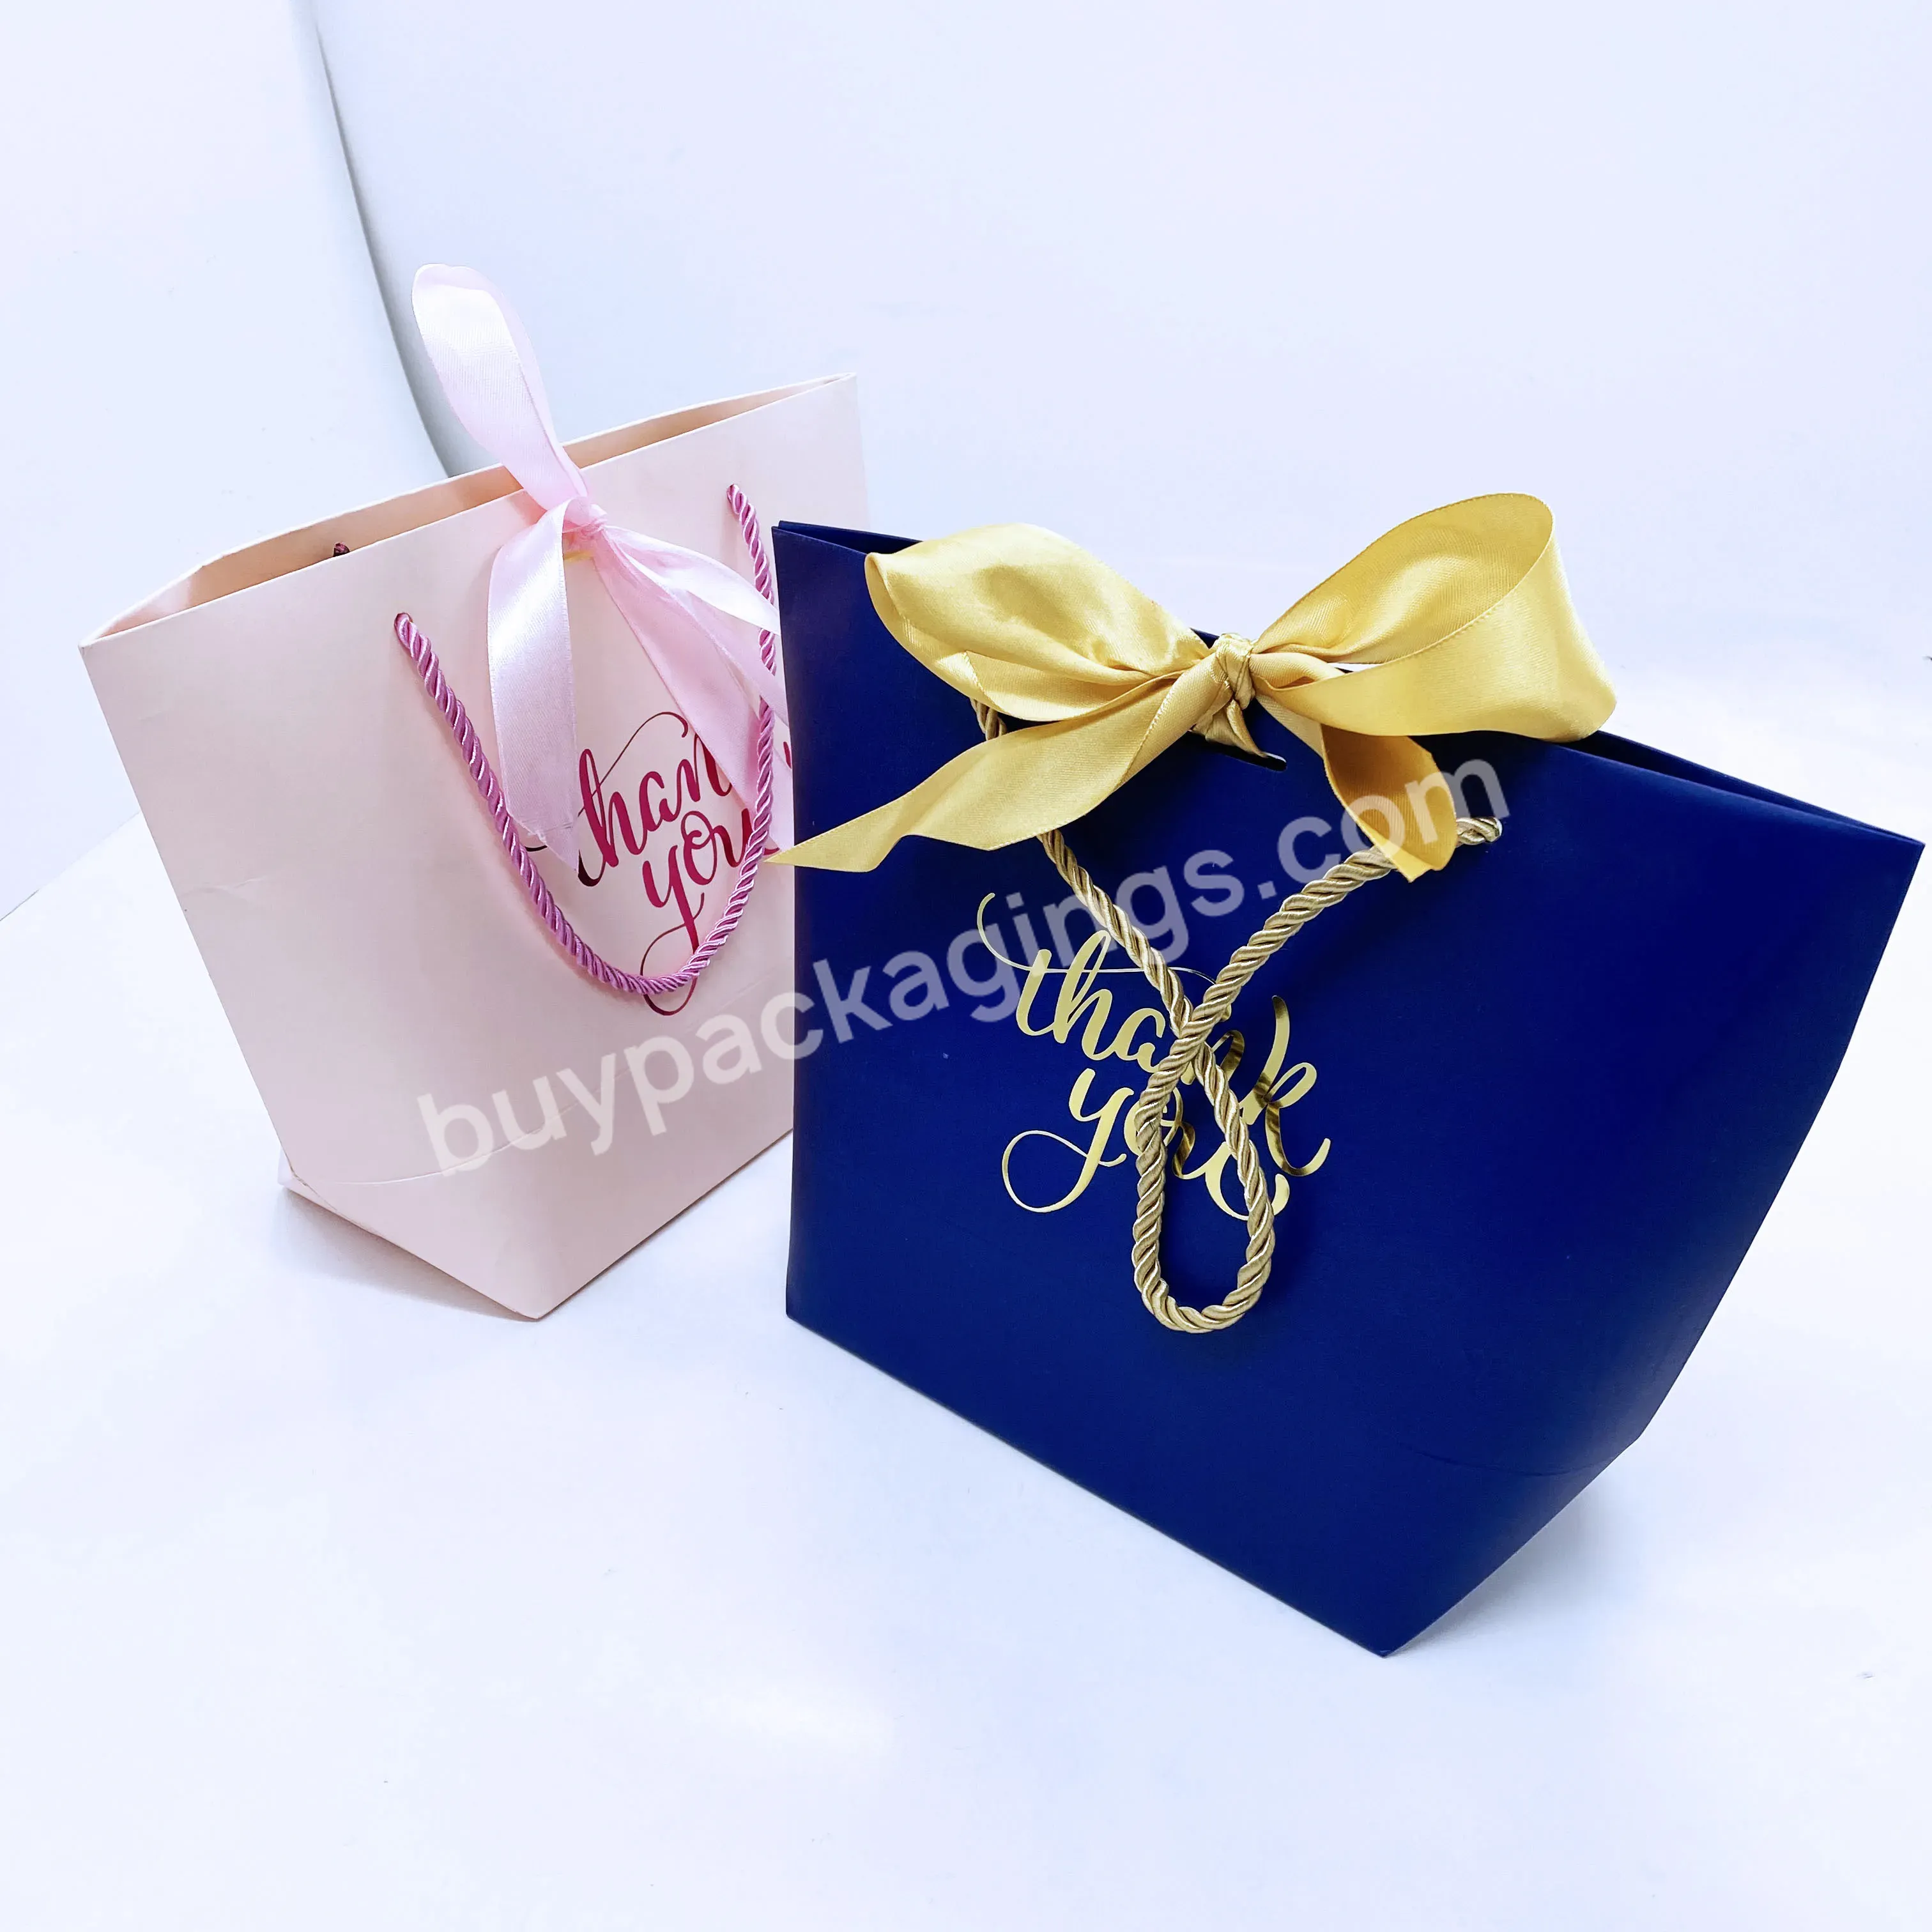 Custom Ribbon Handles Personalized Gift Bags Clothes Shoe Brand Retail Luxury Shopping Bag Paper Boutique With Your Own Logo - Buy Personalized Gift Bags,Shopping Bag Paper,Bag Paper Boutique.